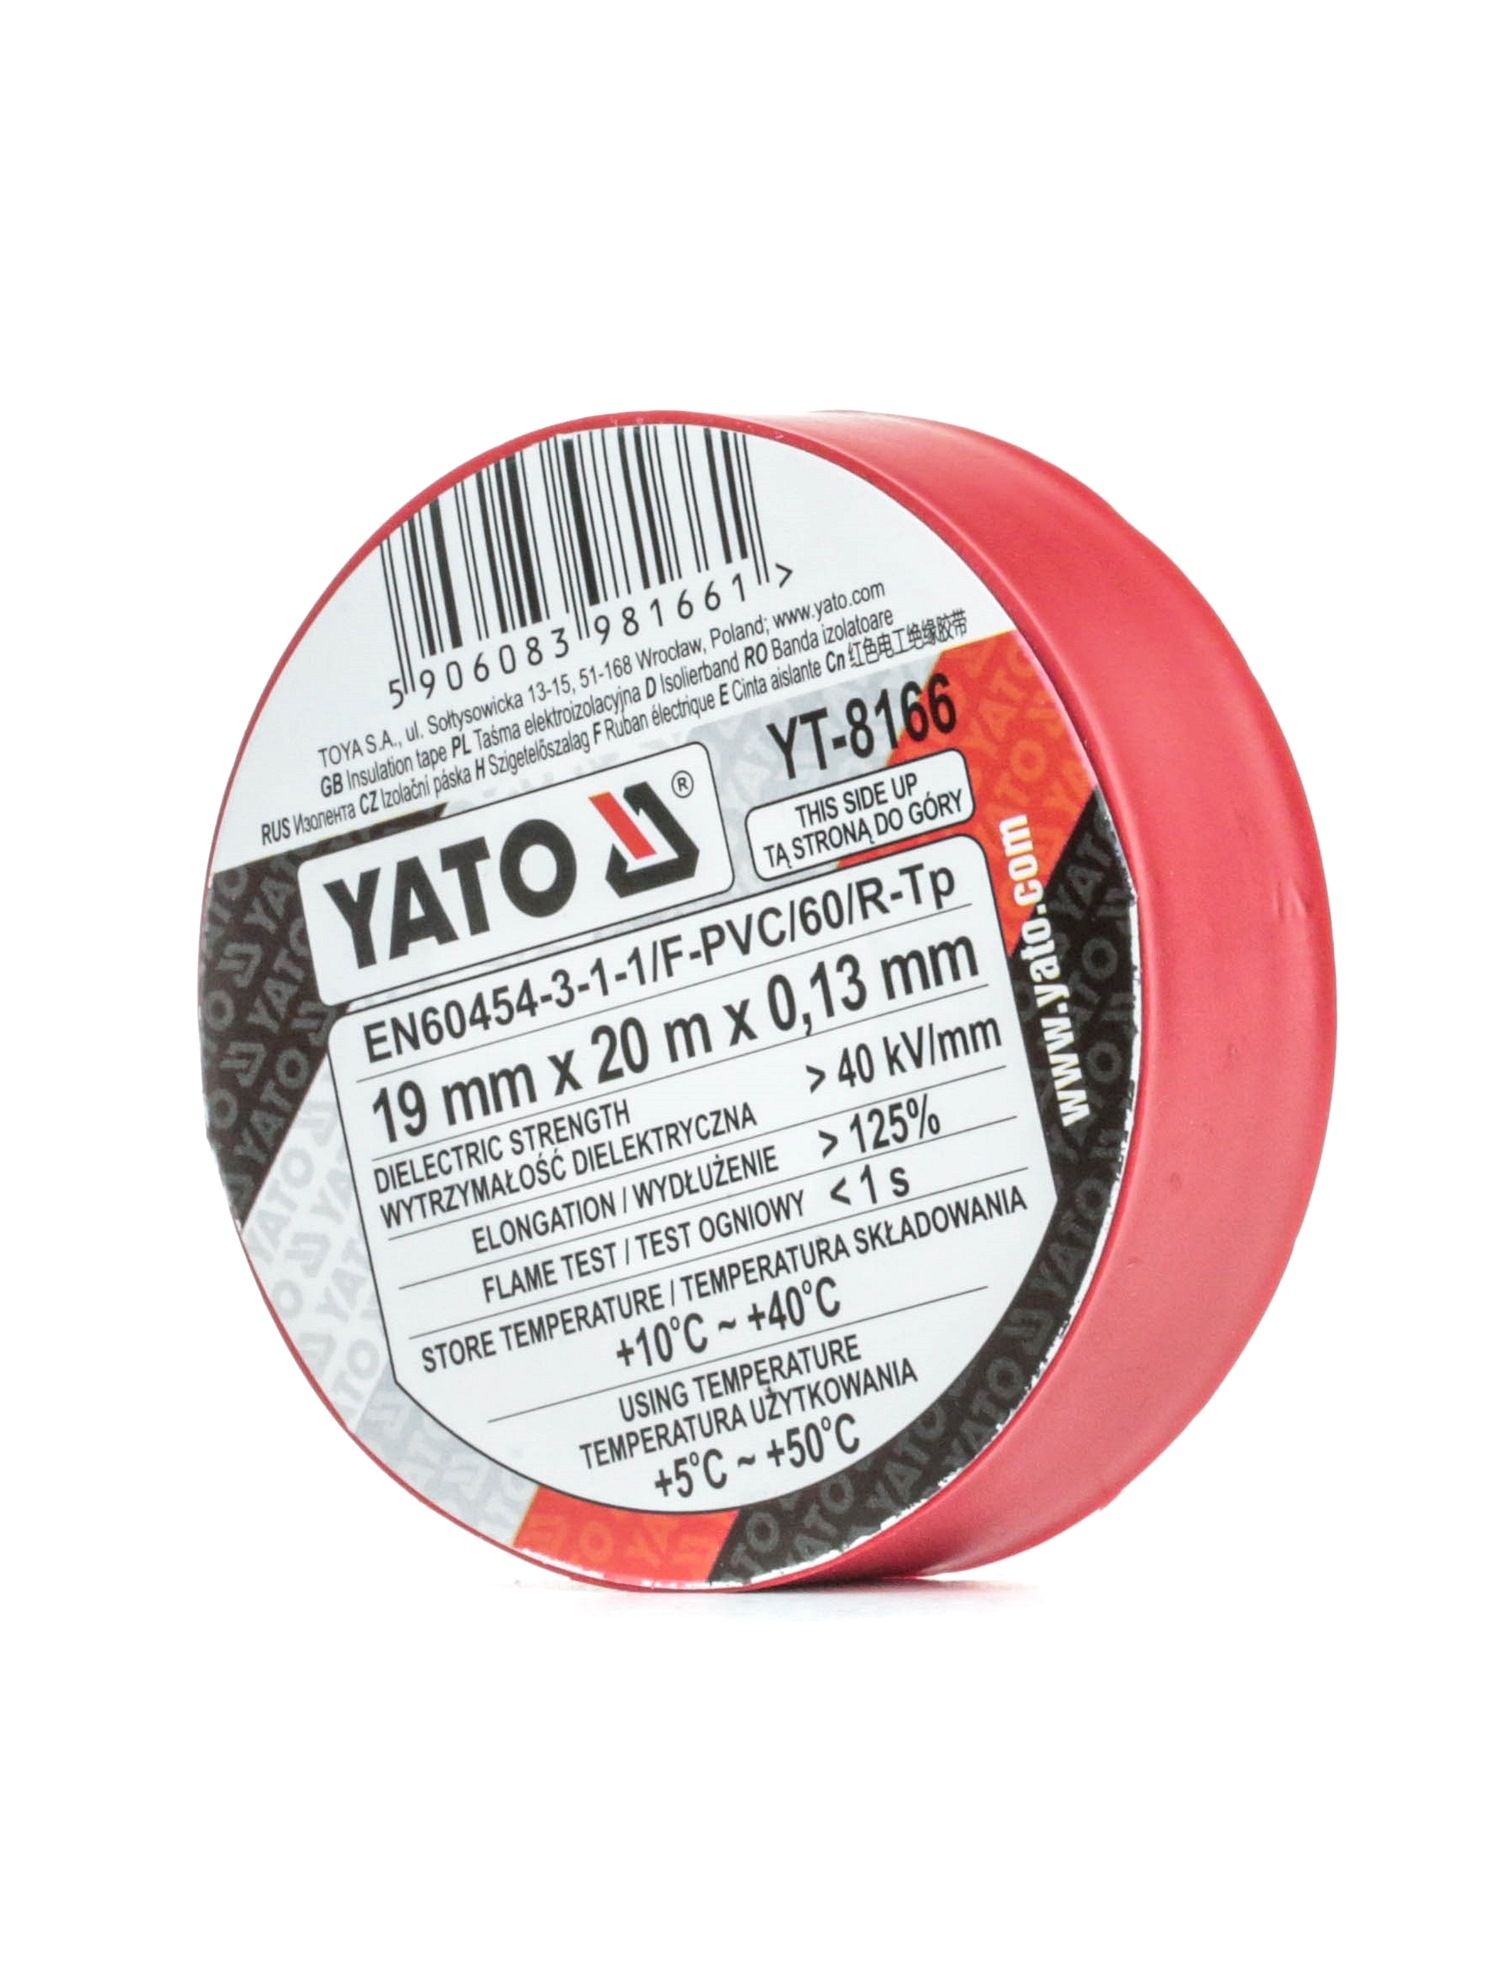 YATO YT8166 Adhesive tapes 19mm, red, PVC, Fabric film, 20m, One-sided